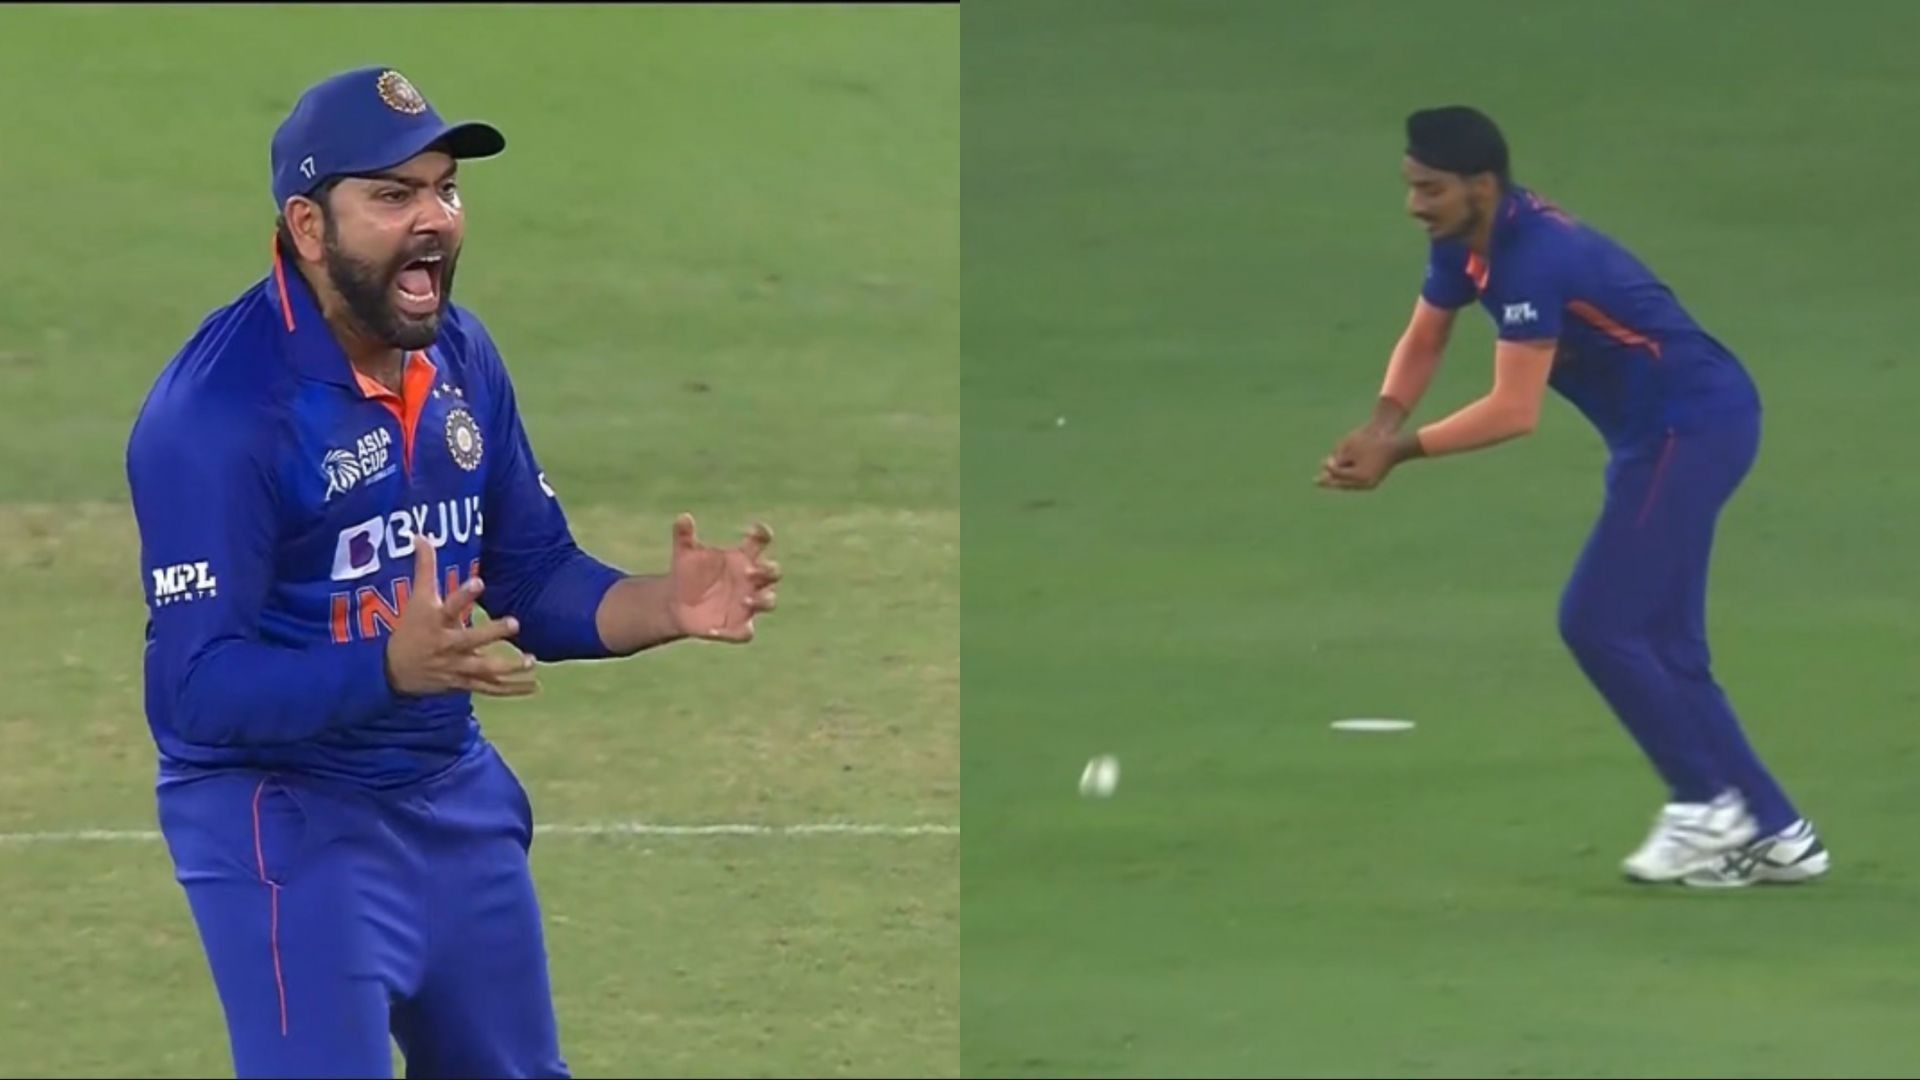 Team India skipper Rohit Sharma (left) reacts after Arshdeep Singh drops a simple catch against Pakistan. Pic: Disney+ Hotstar